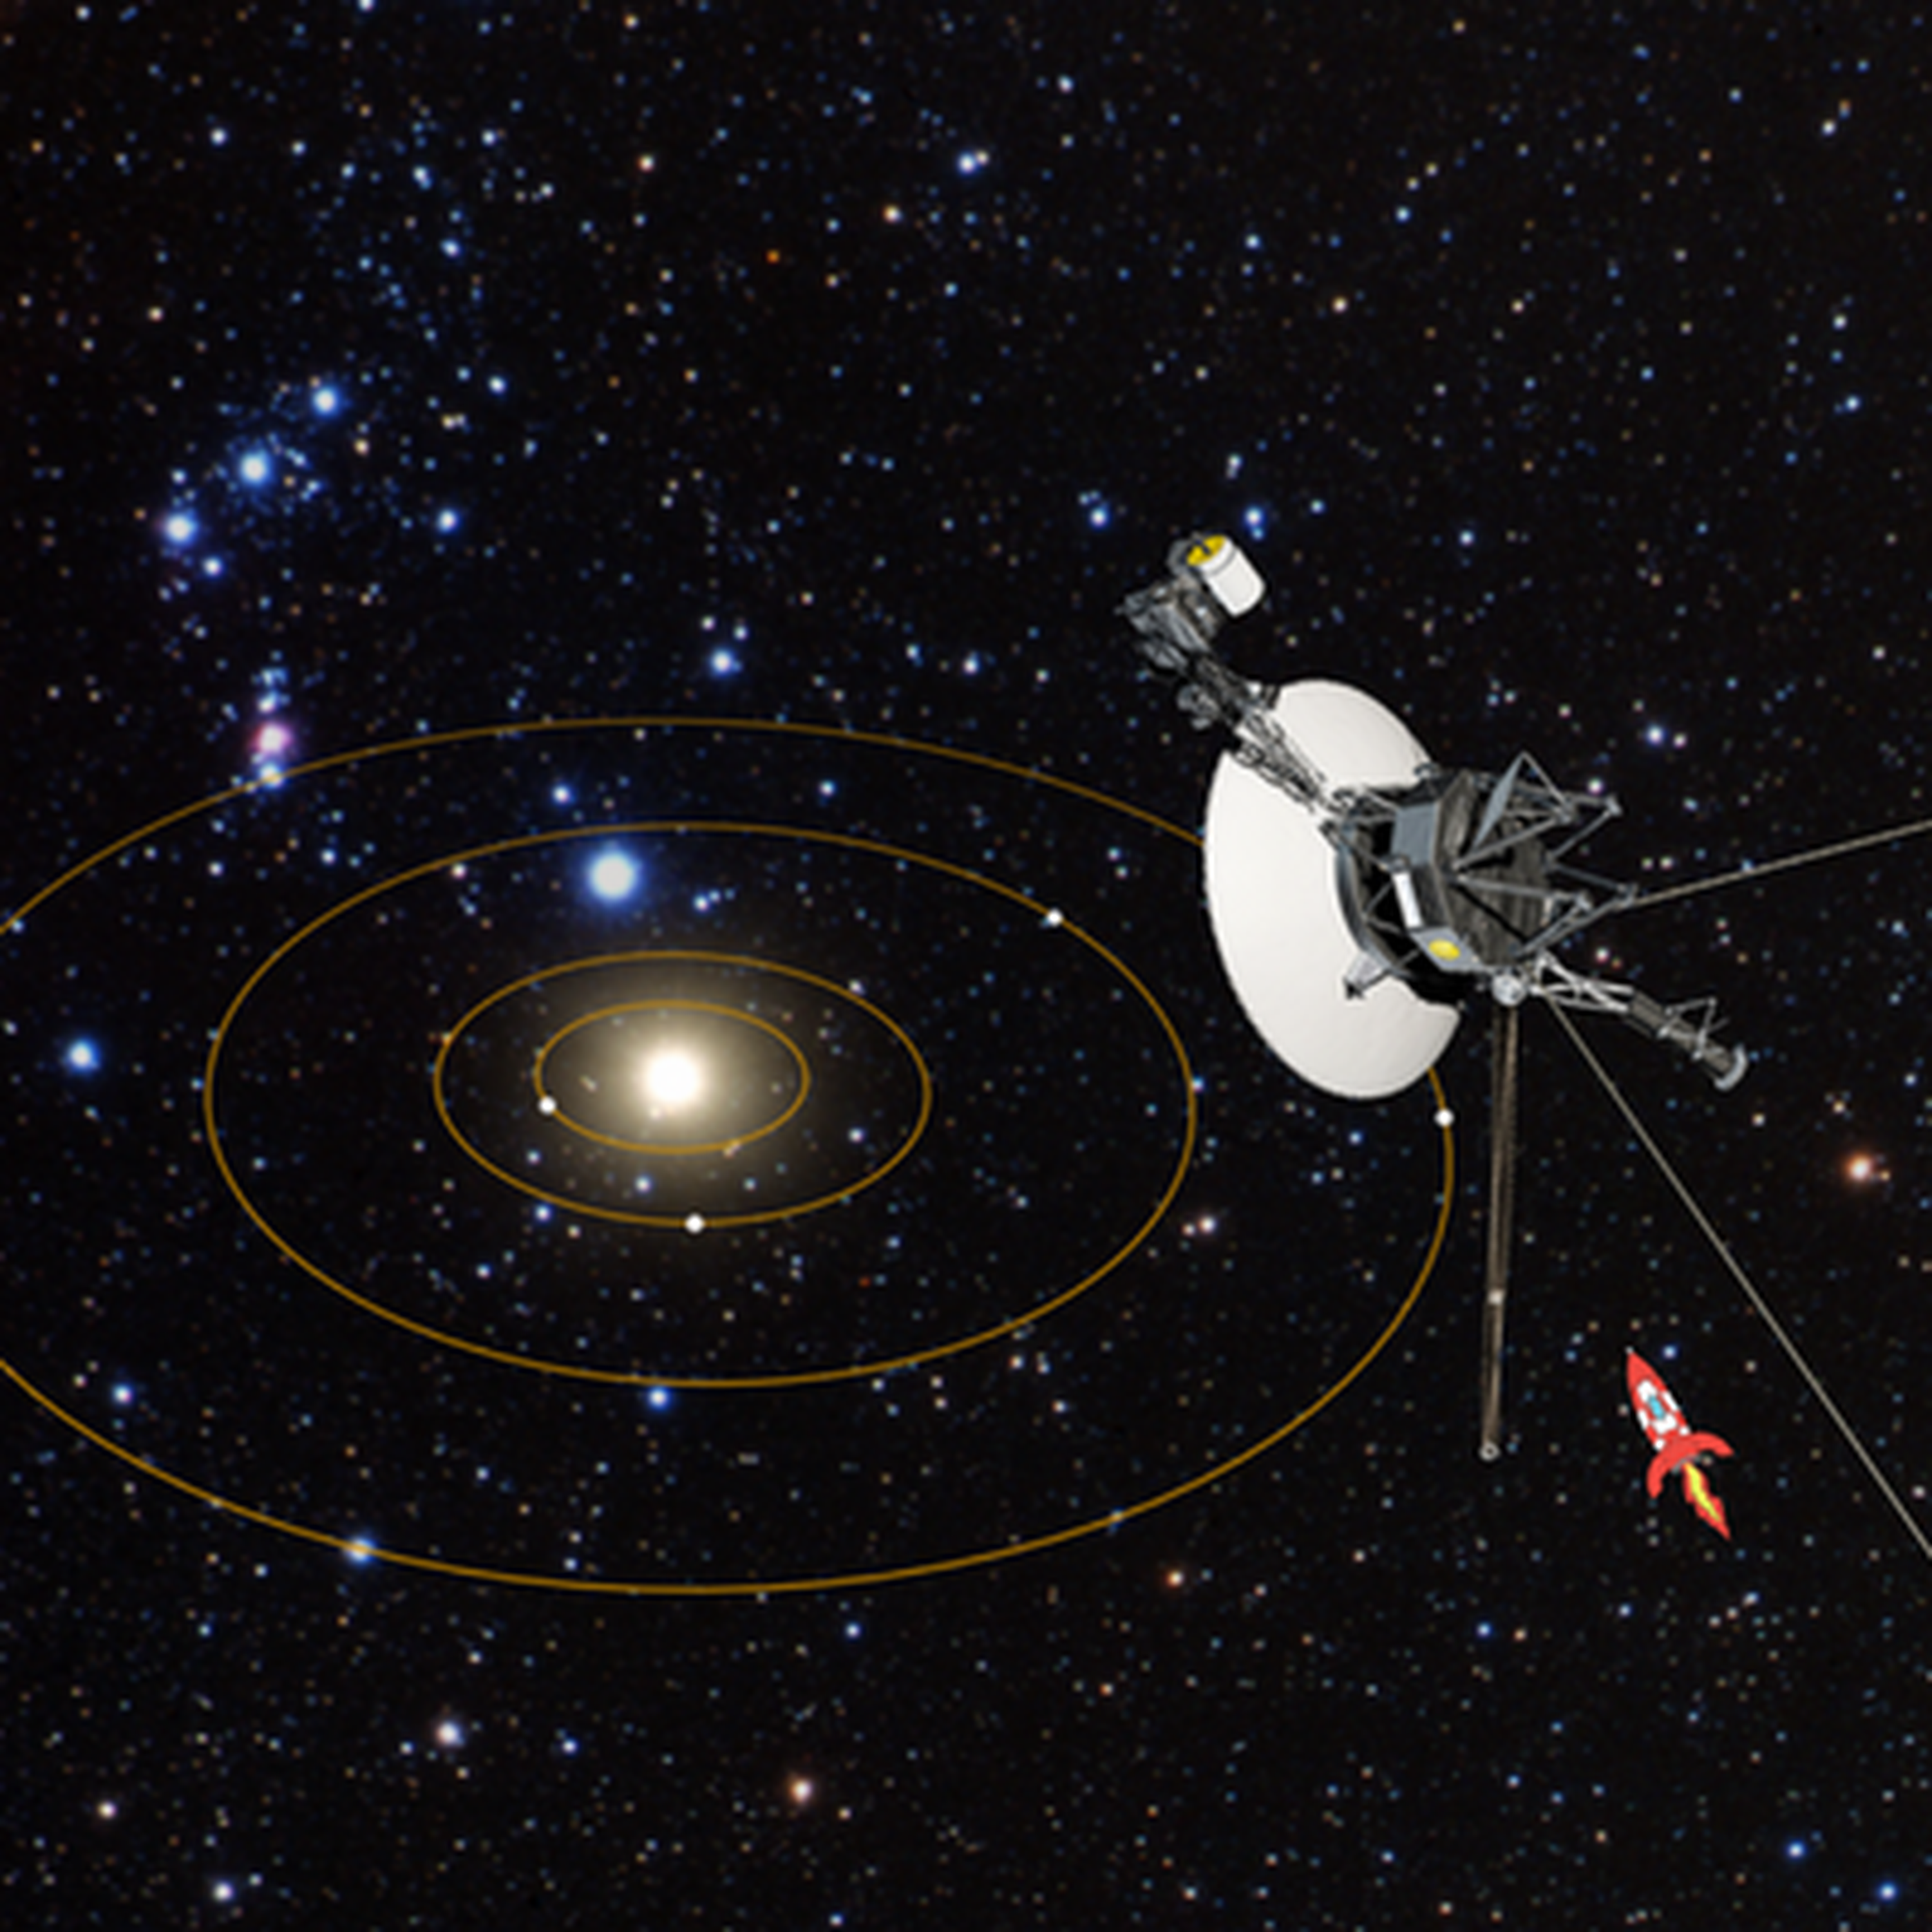 97: Voyager 1 Fires Up Thrusters After 37 Years